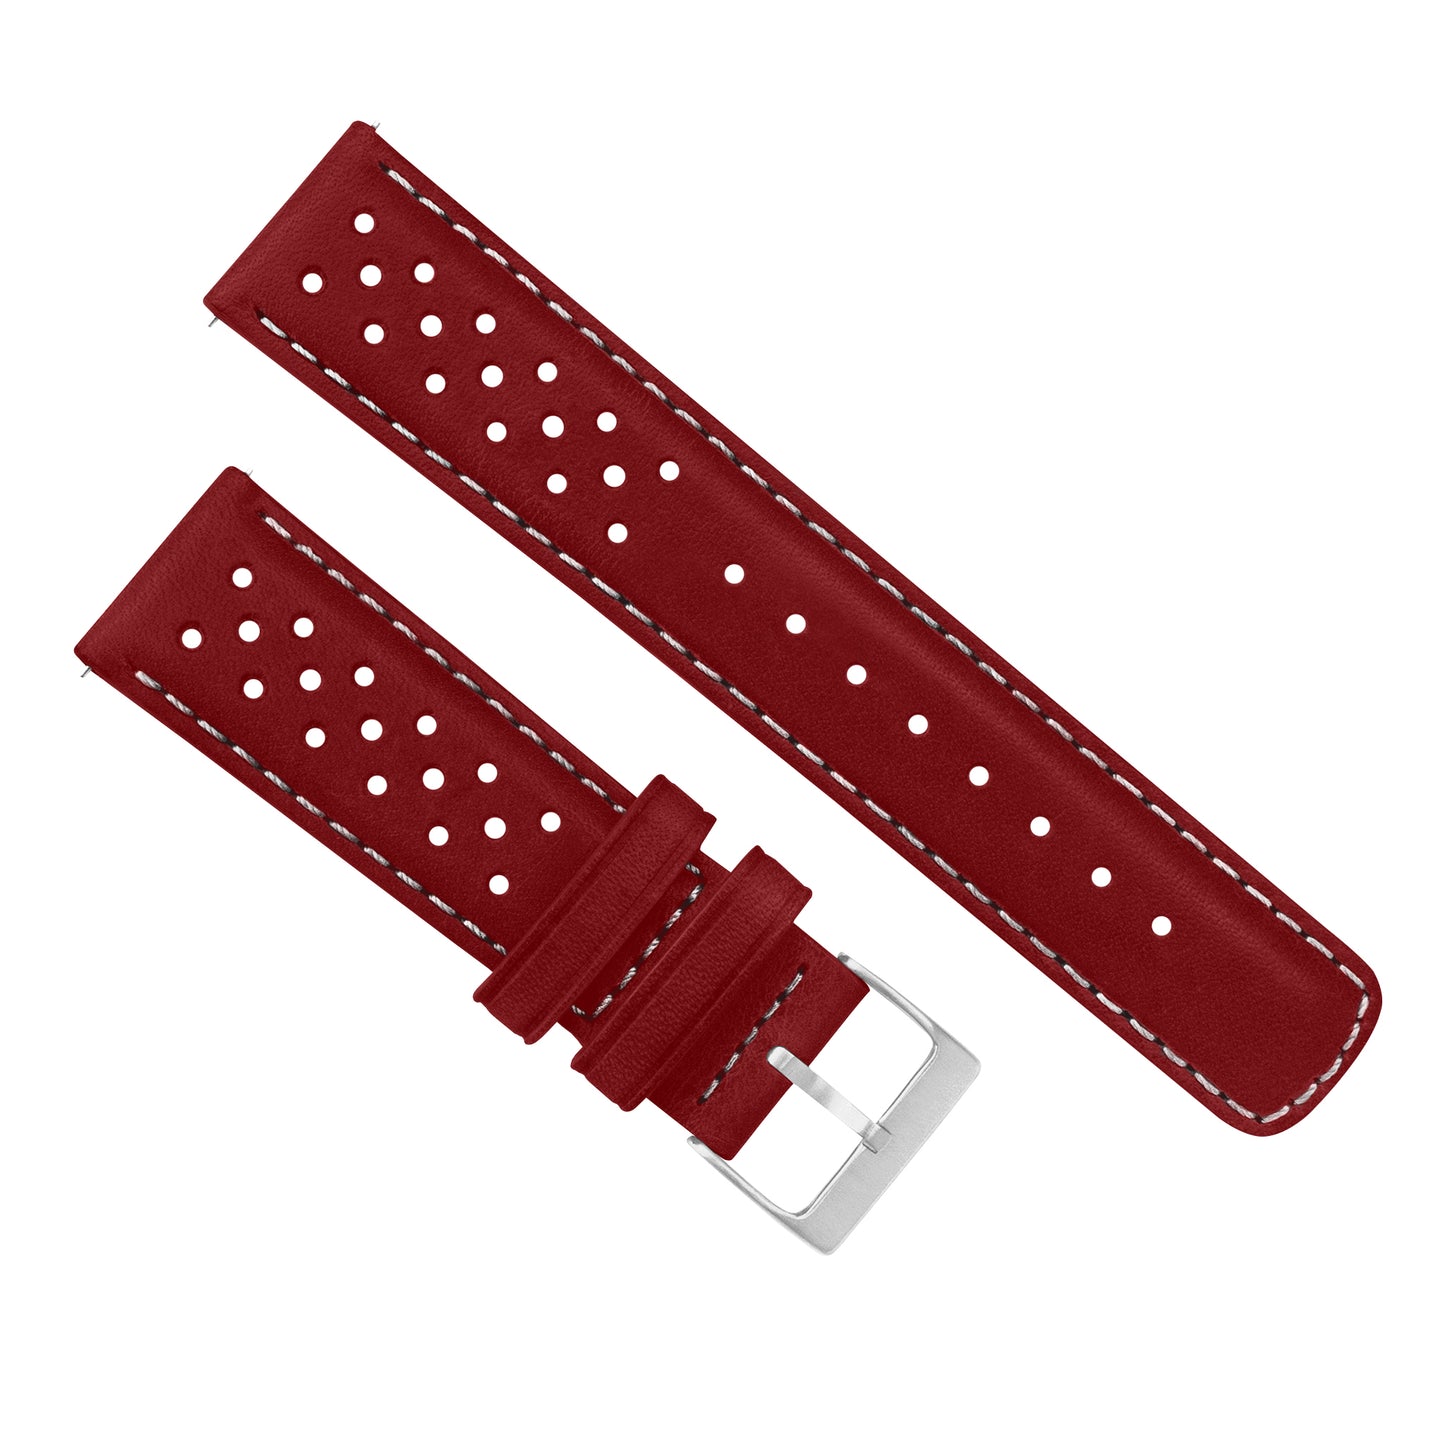 Amazfit Bip Racing Horween Leather Crimson Red Linen Stitch Watch Band